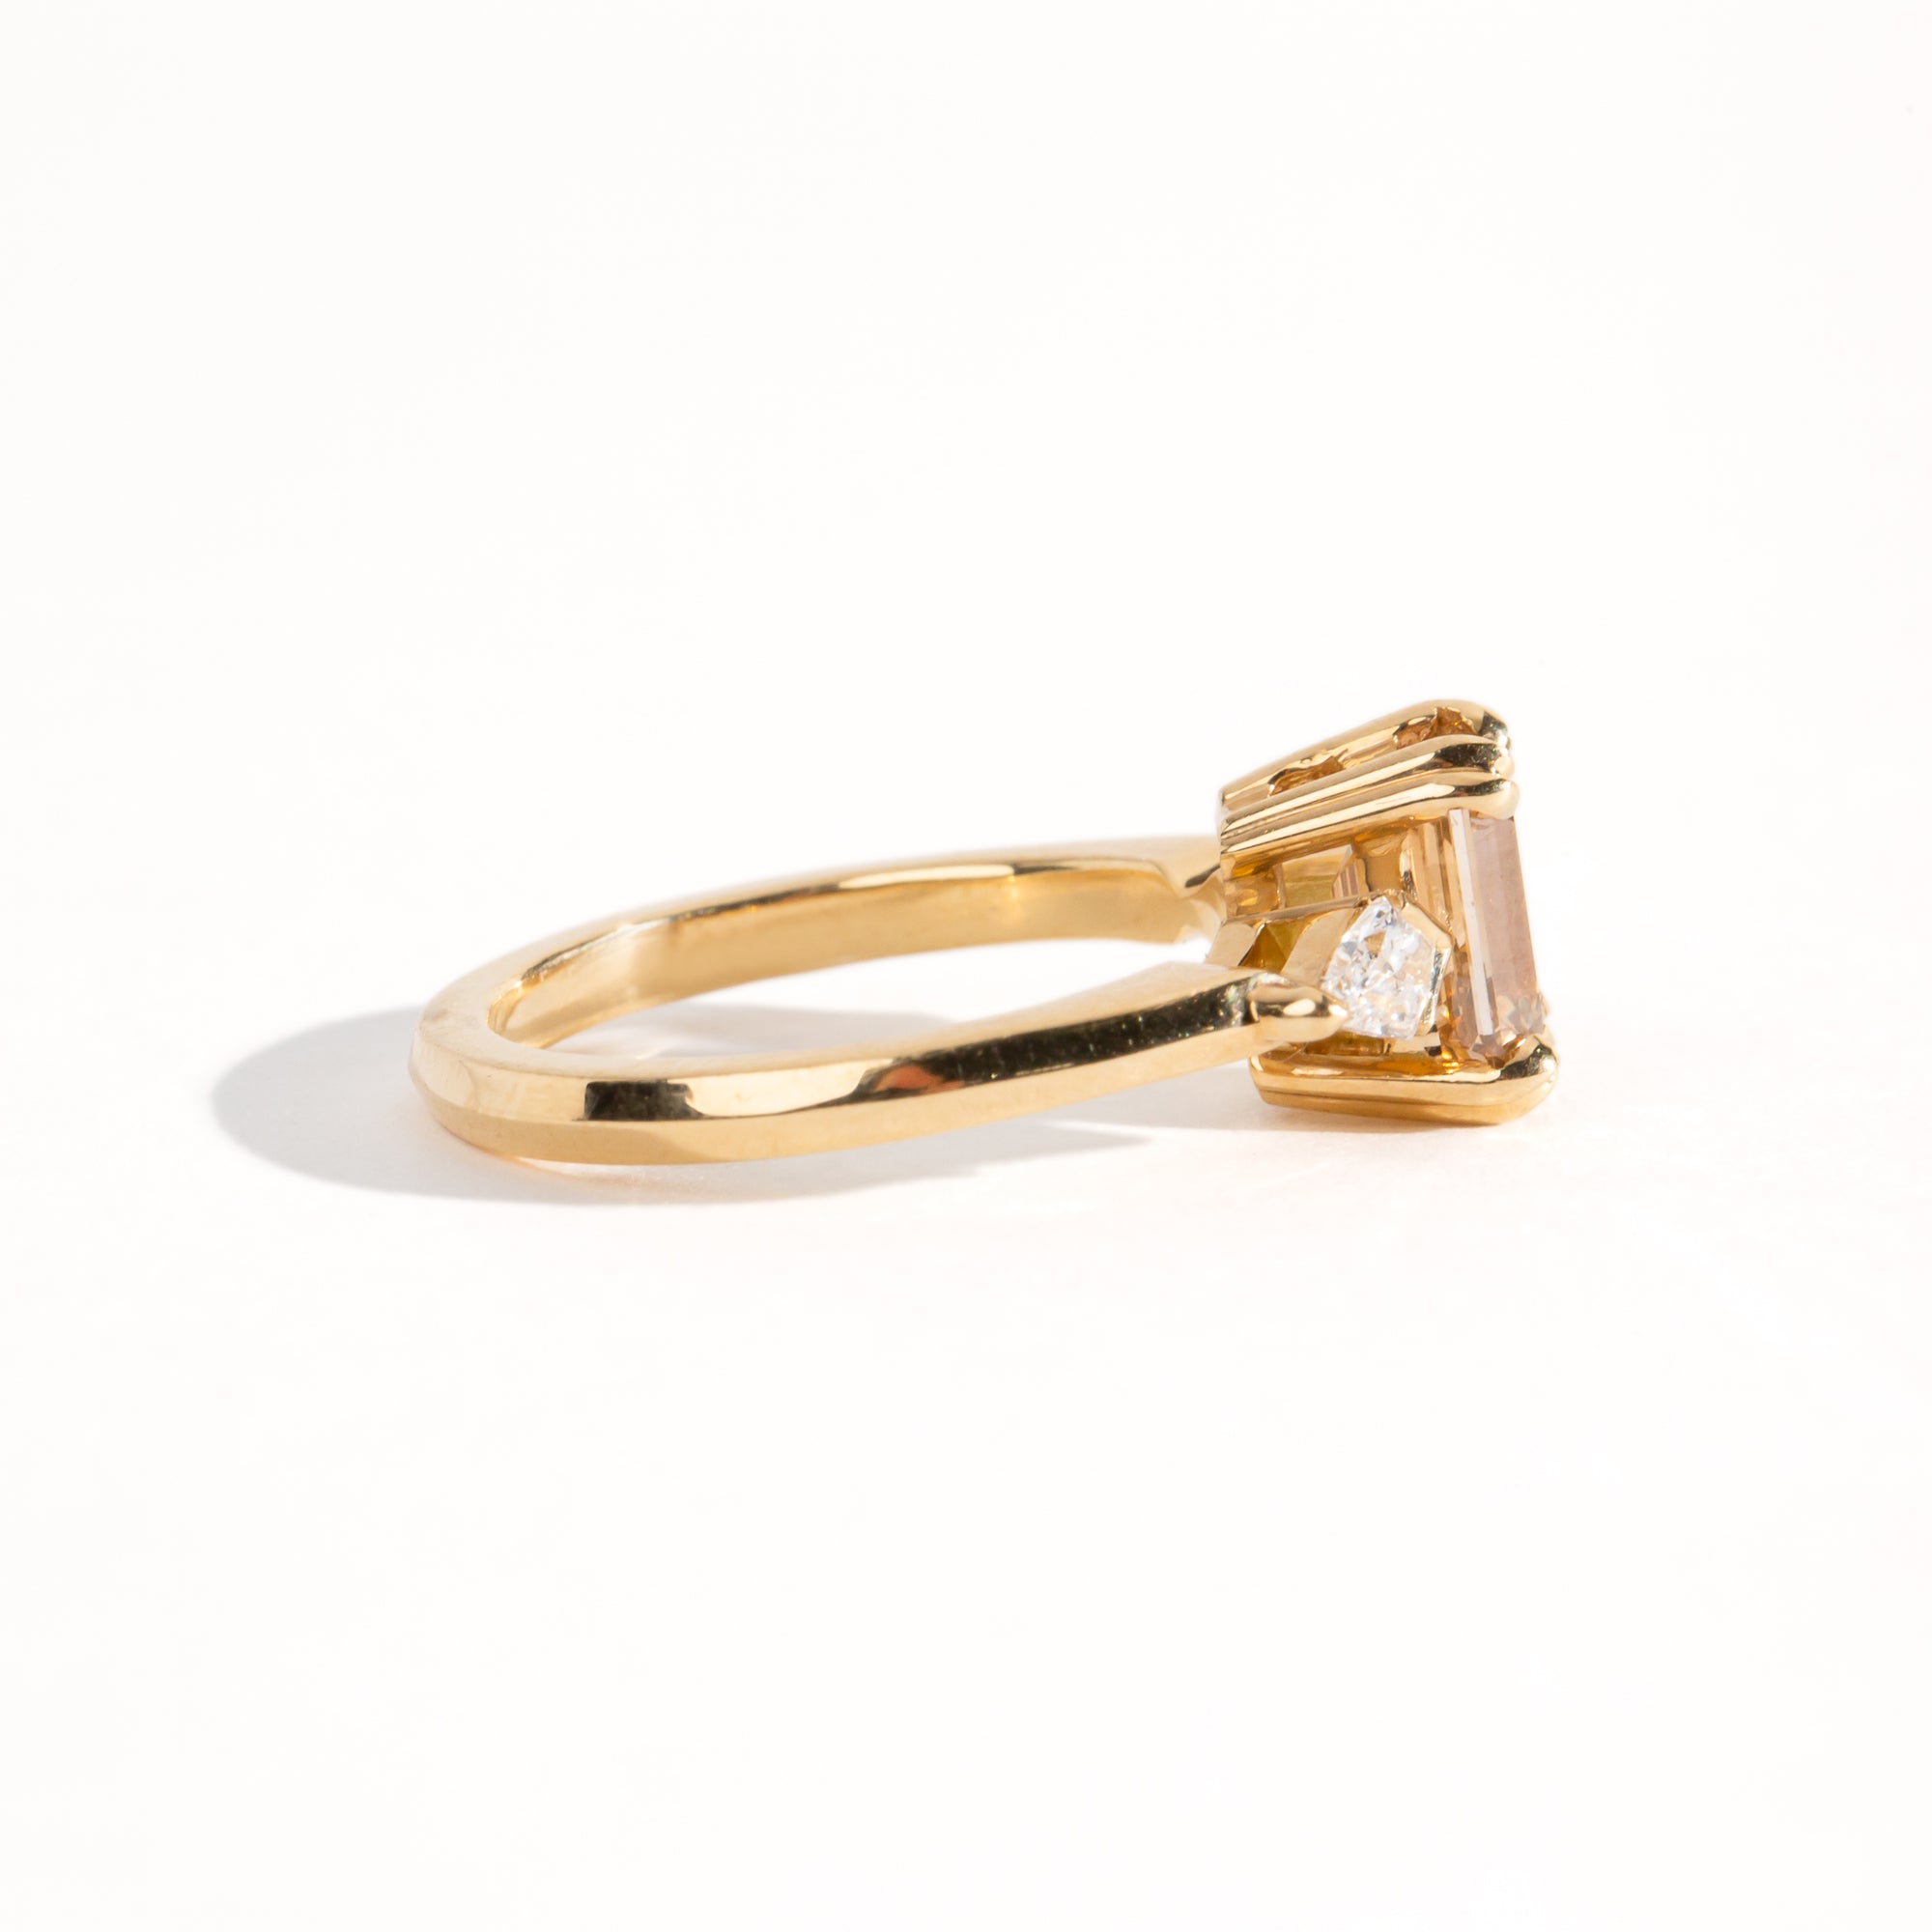 Bespoke engagement ring with rectangular radiant cut champagne diamond surrounded by kite cut white diamonds. Recycled, refined gold custom and crafted in Melbourne by black Finch Jewellery